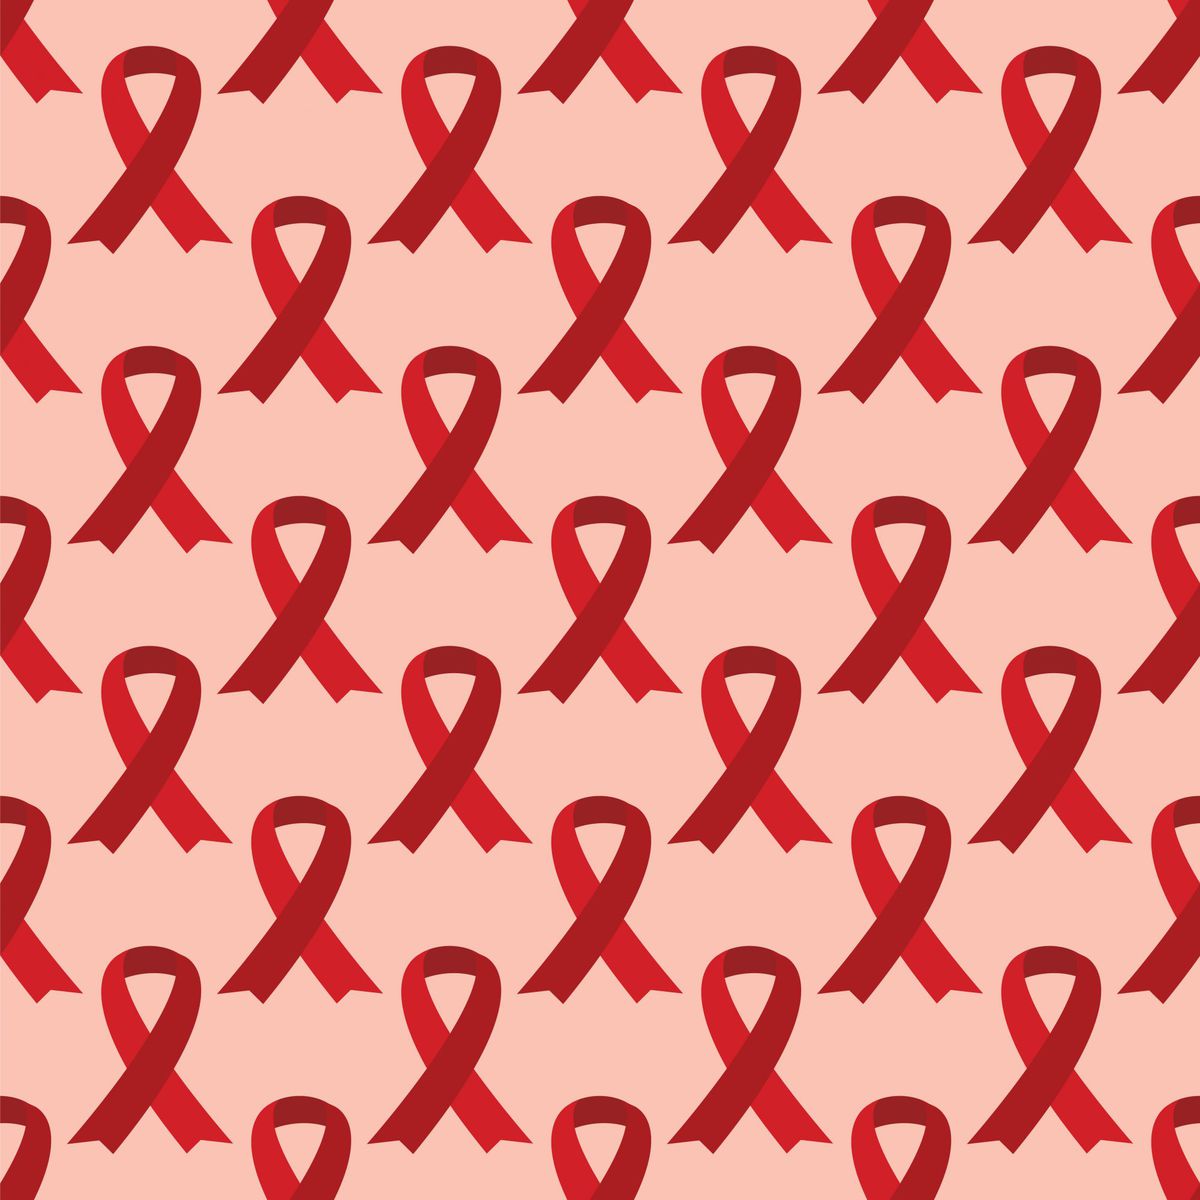 A Patient Was Cured of HIV for the Second Time in History. Here's What That Means